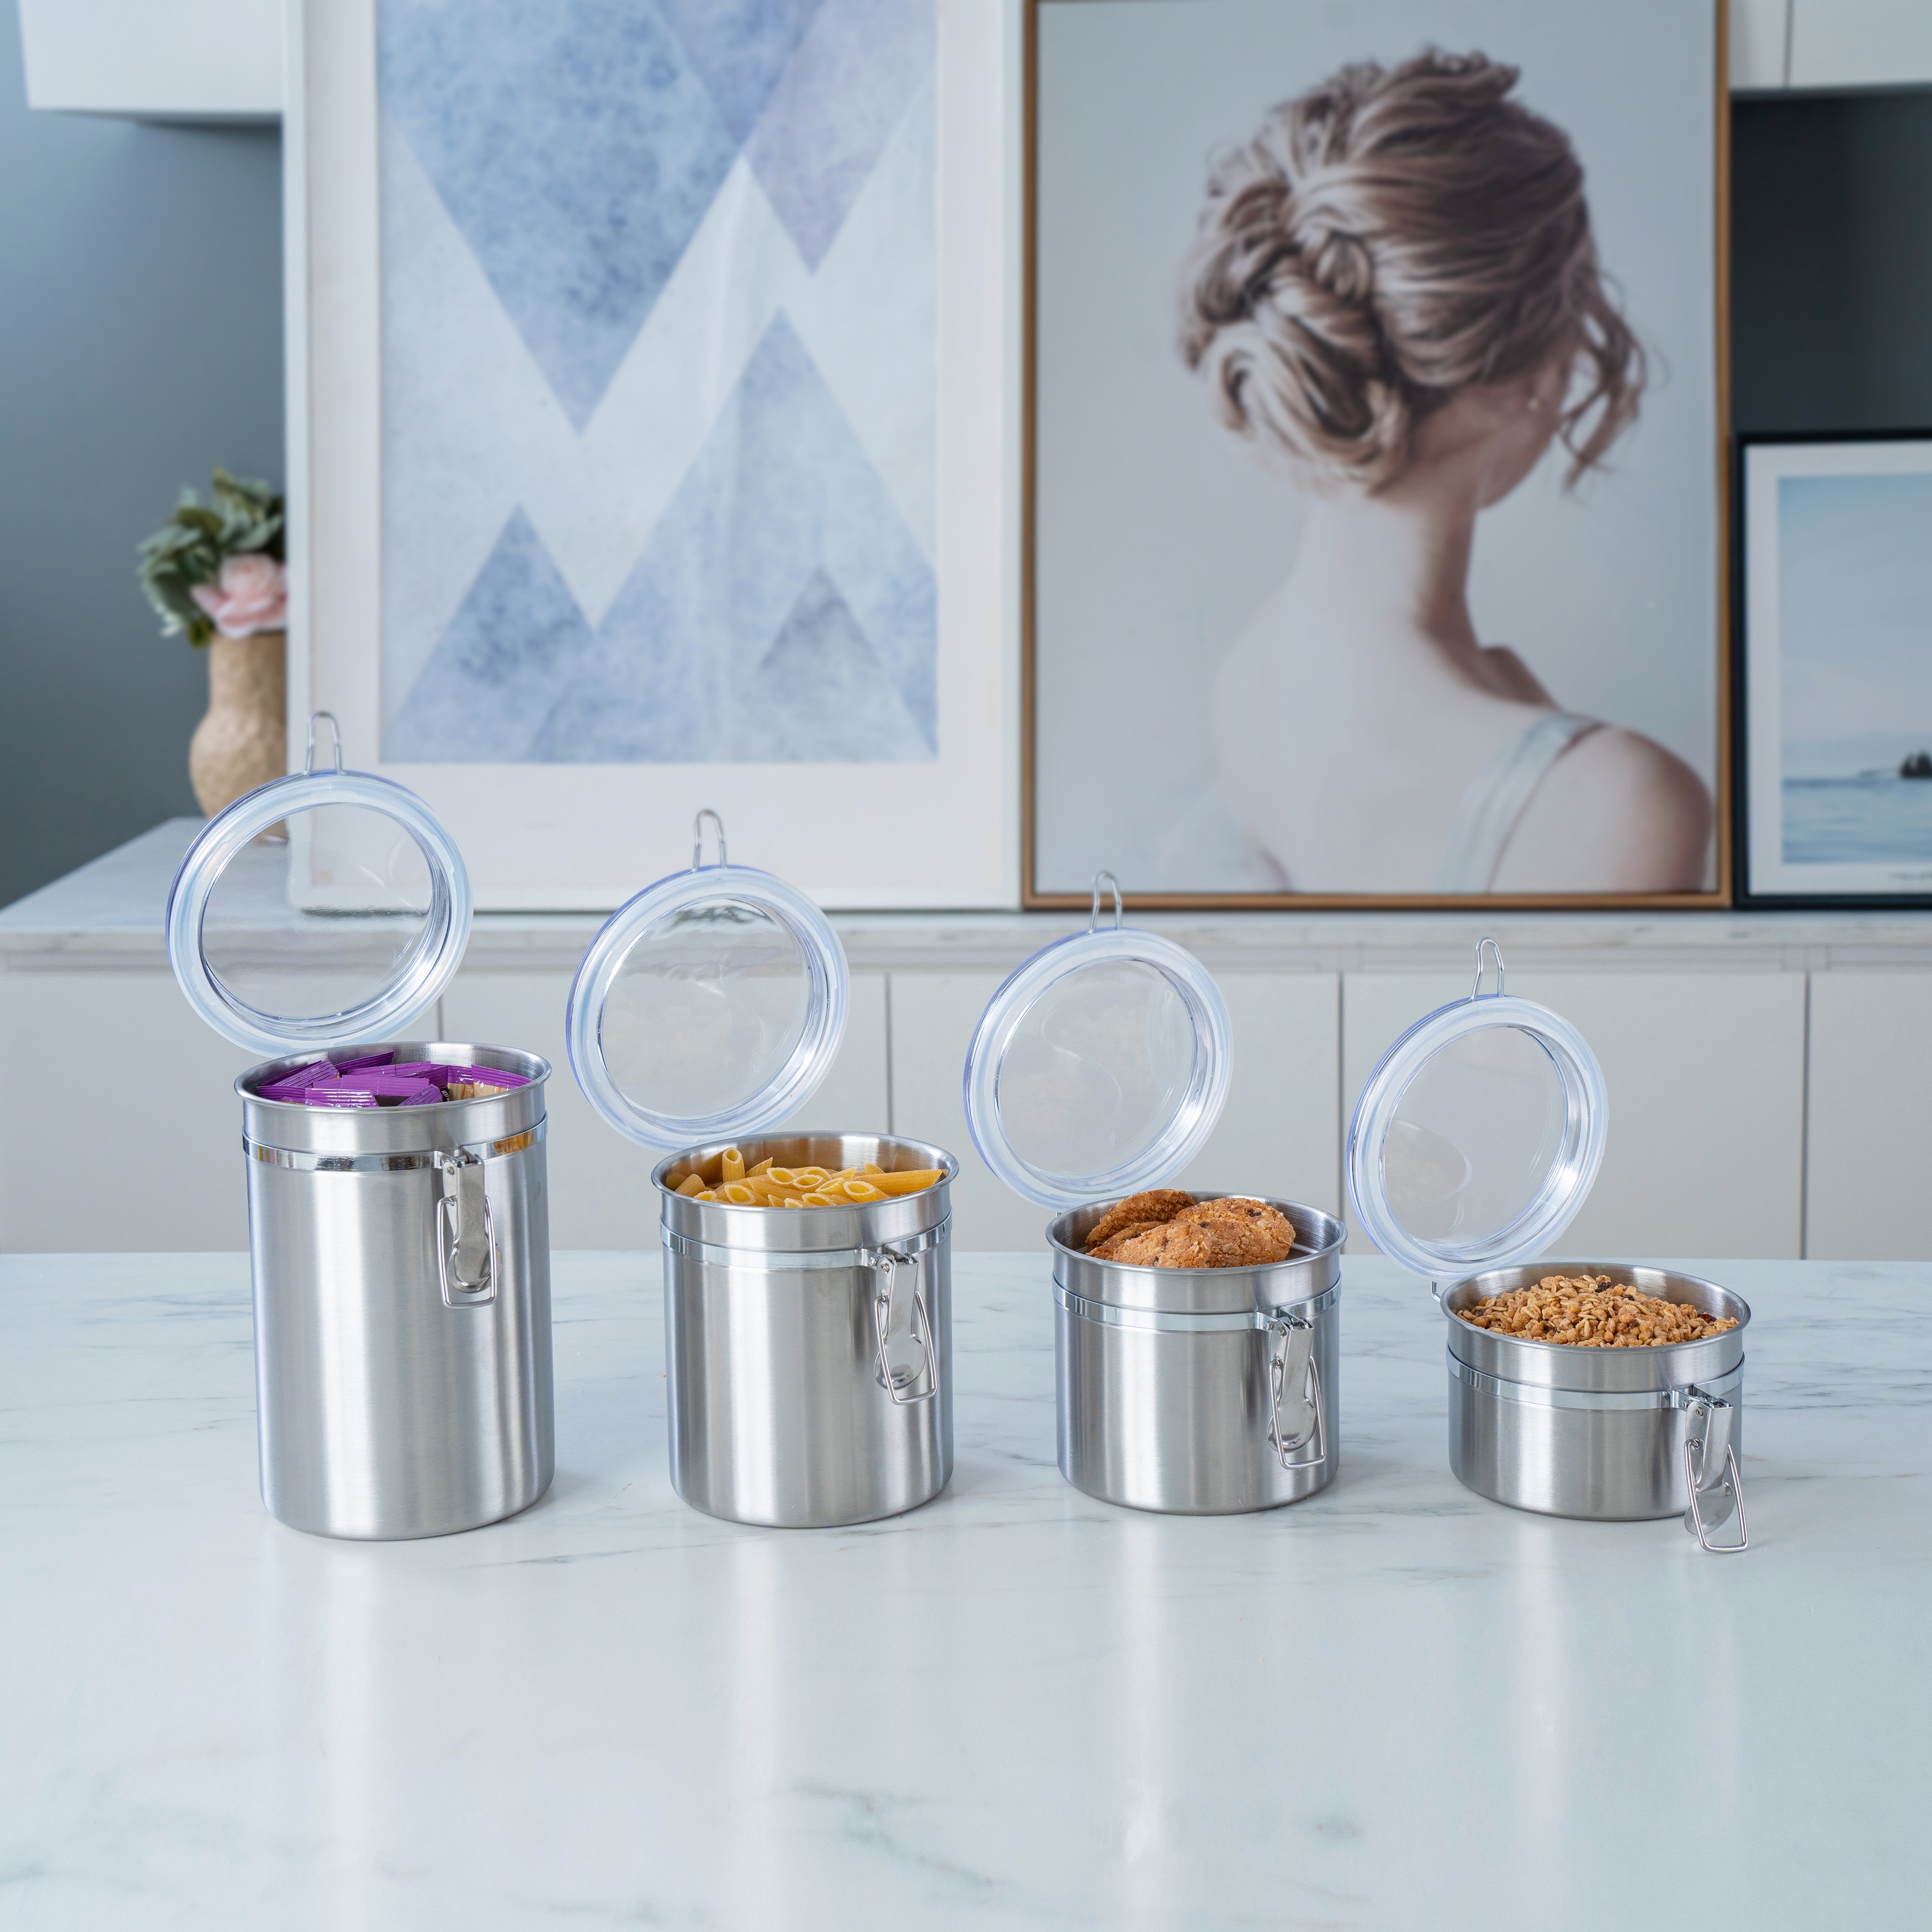 https://ak1.ostkcdn.com/images/products/is/images/direct/7dc6082649ee6fba854325d54d1e0f5248e2f699/Creative-Home-4-Piece-Stainless-Steel-Canister-Set-with-Airtight-Lid-and-Locking-Clamp%2C-Stainless-Steel.jpg